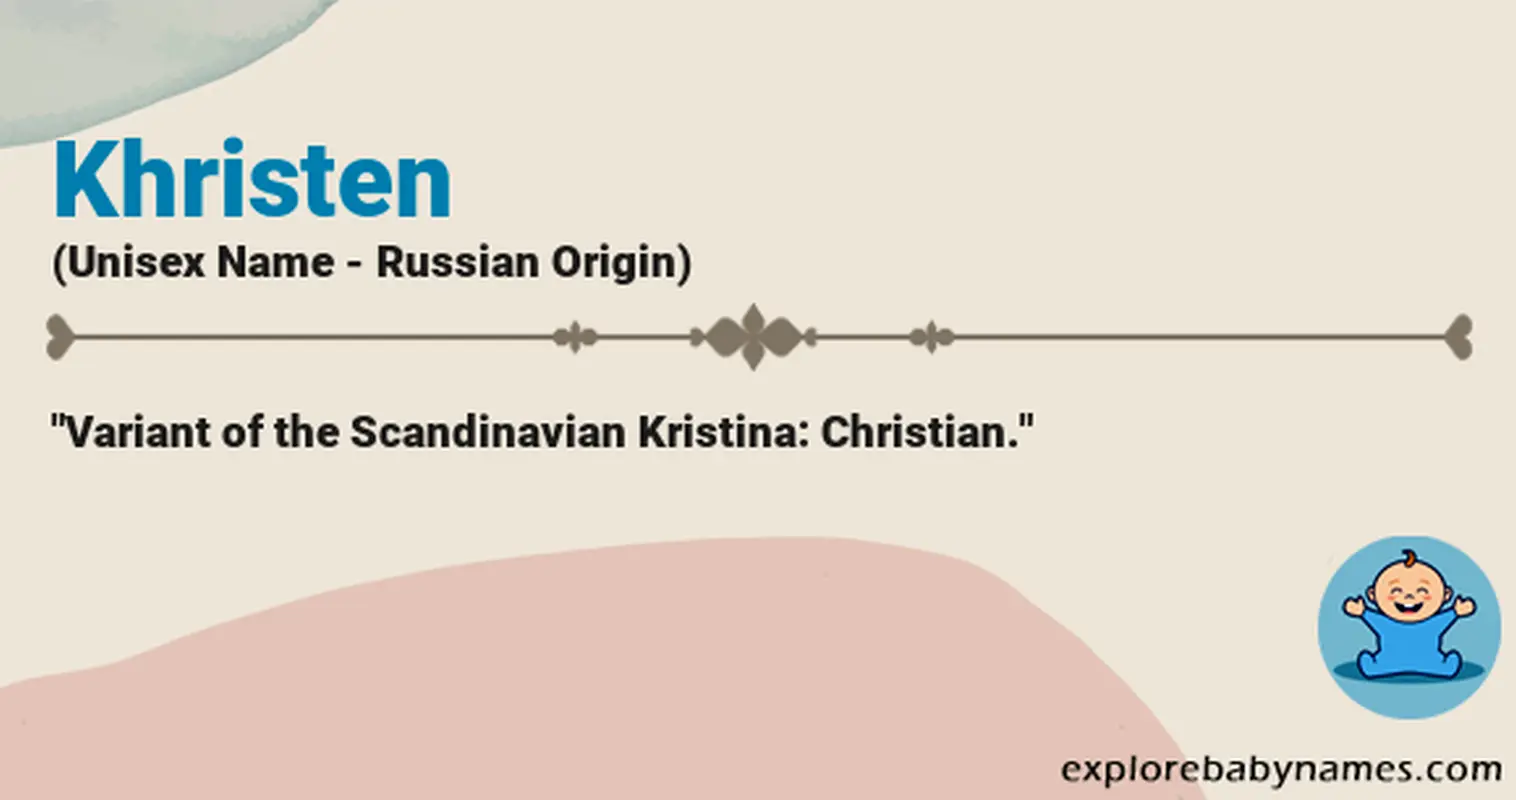 Meaning of Khristen